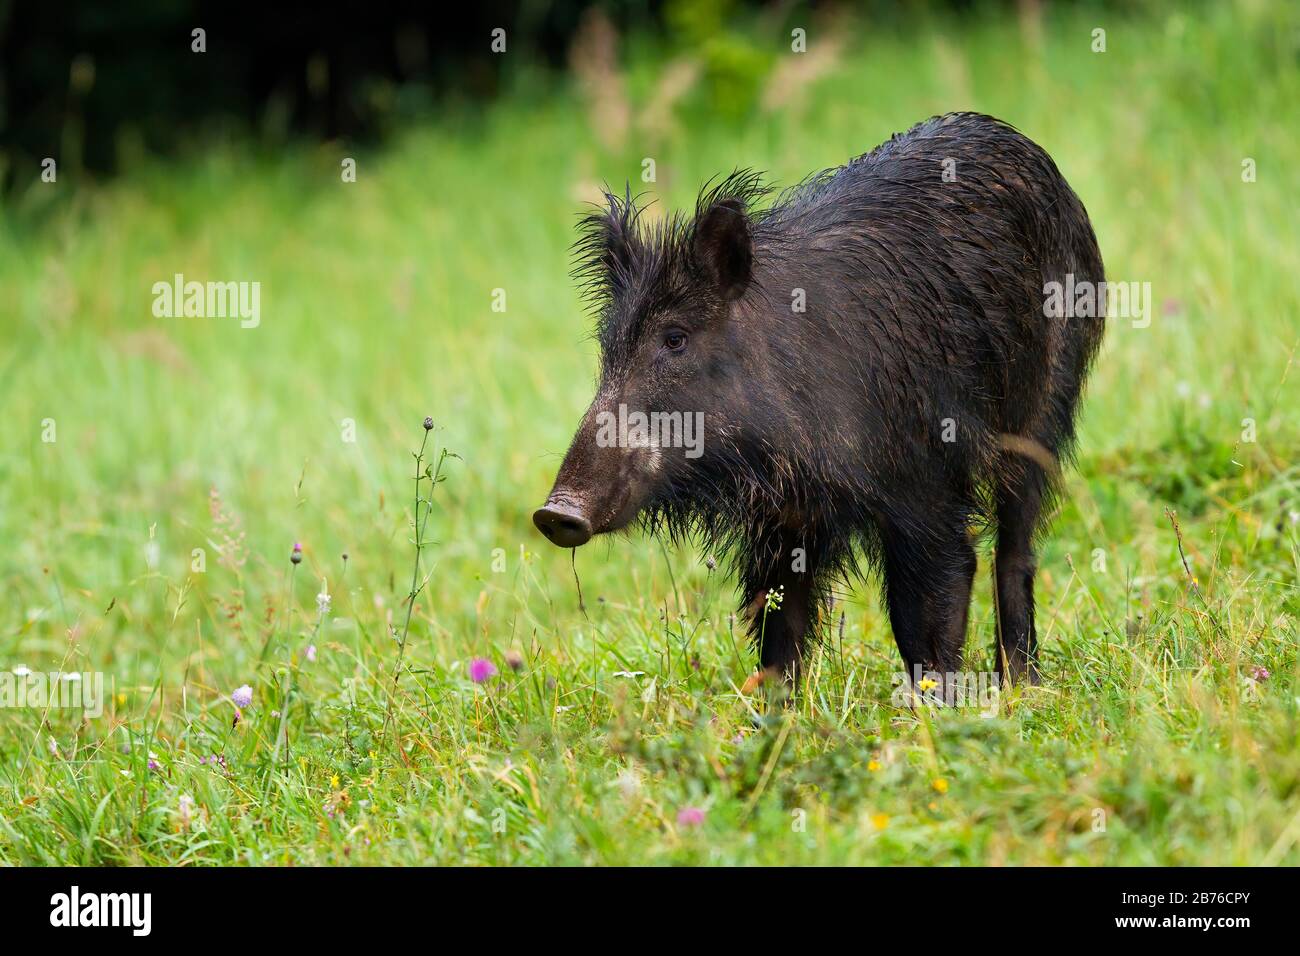 Unaware wild boar on hay field in wilderness looking aside with green background Stock Photo